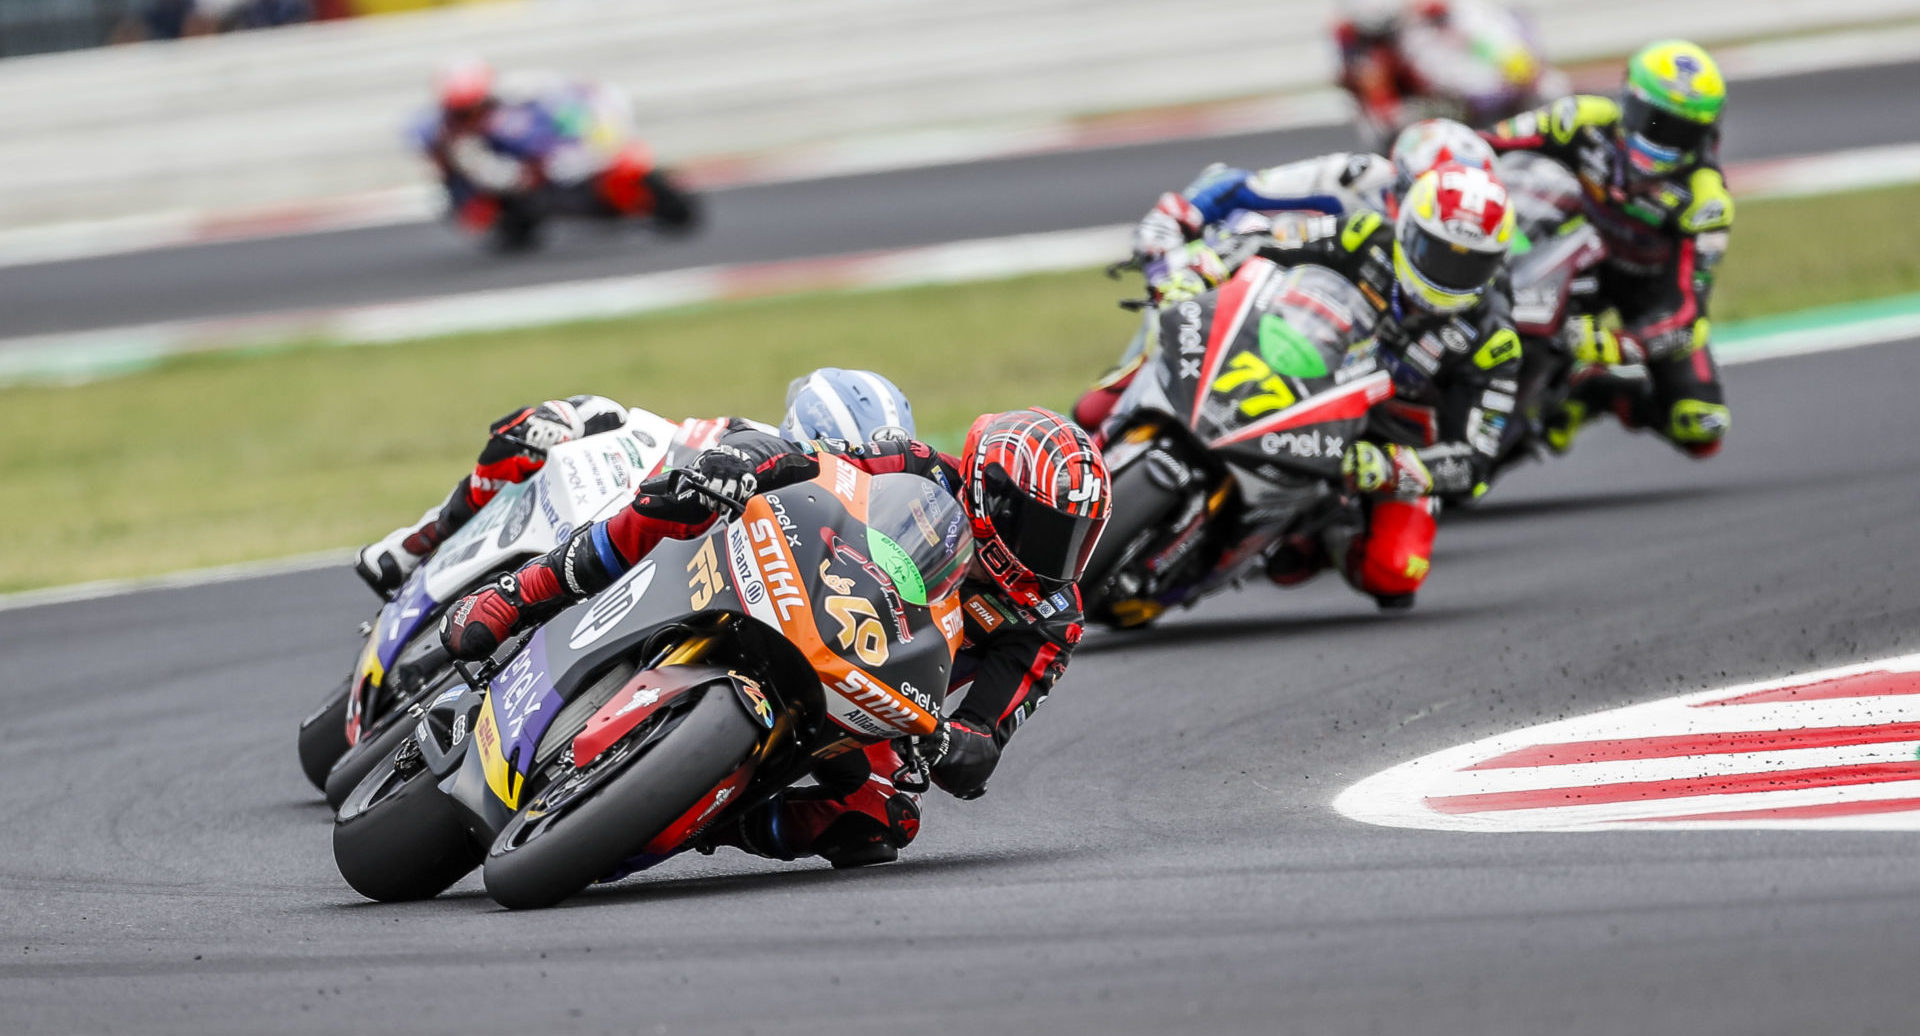 Jordi Torres (40) leads a group of riders during a MotoE World Cup race in 2021. Photo by Jesus Robledo, courtesy Energica.